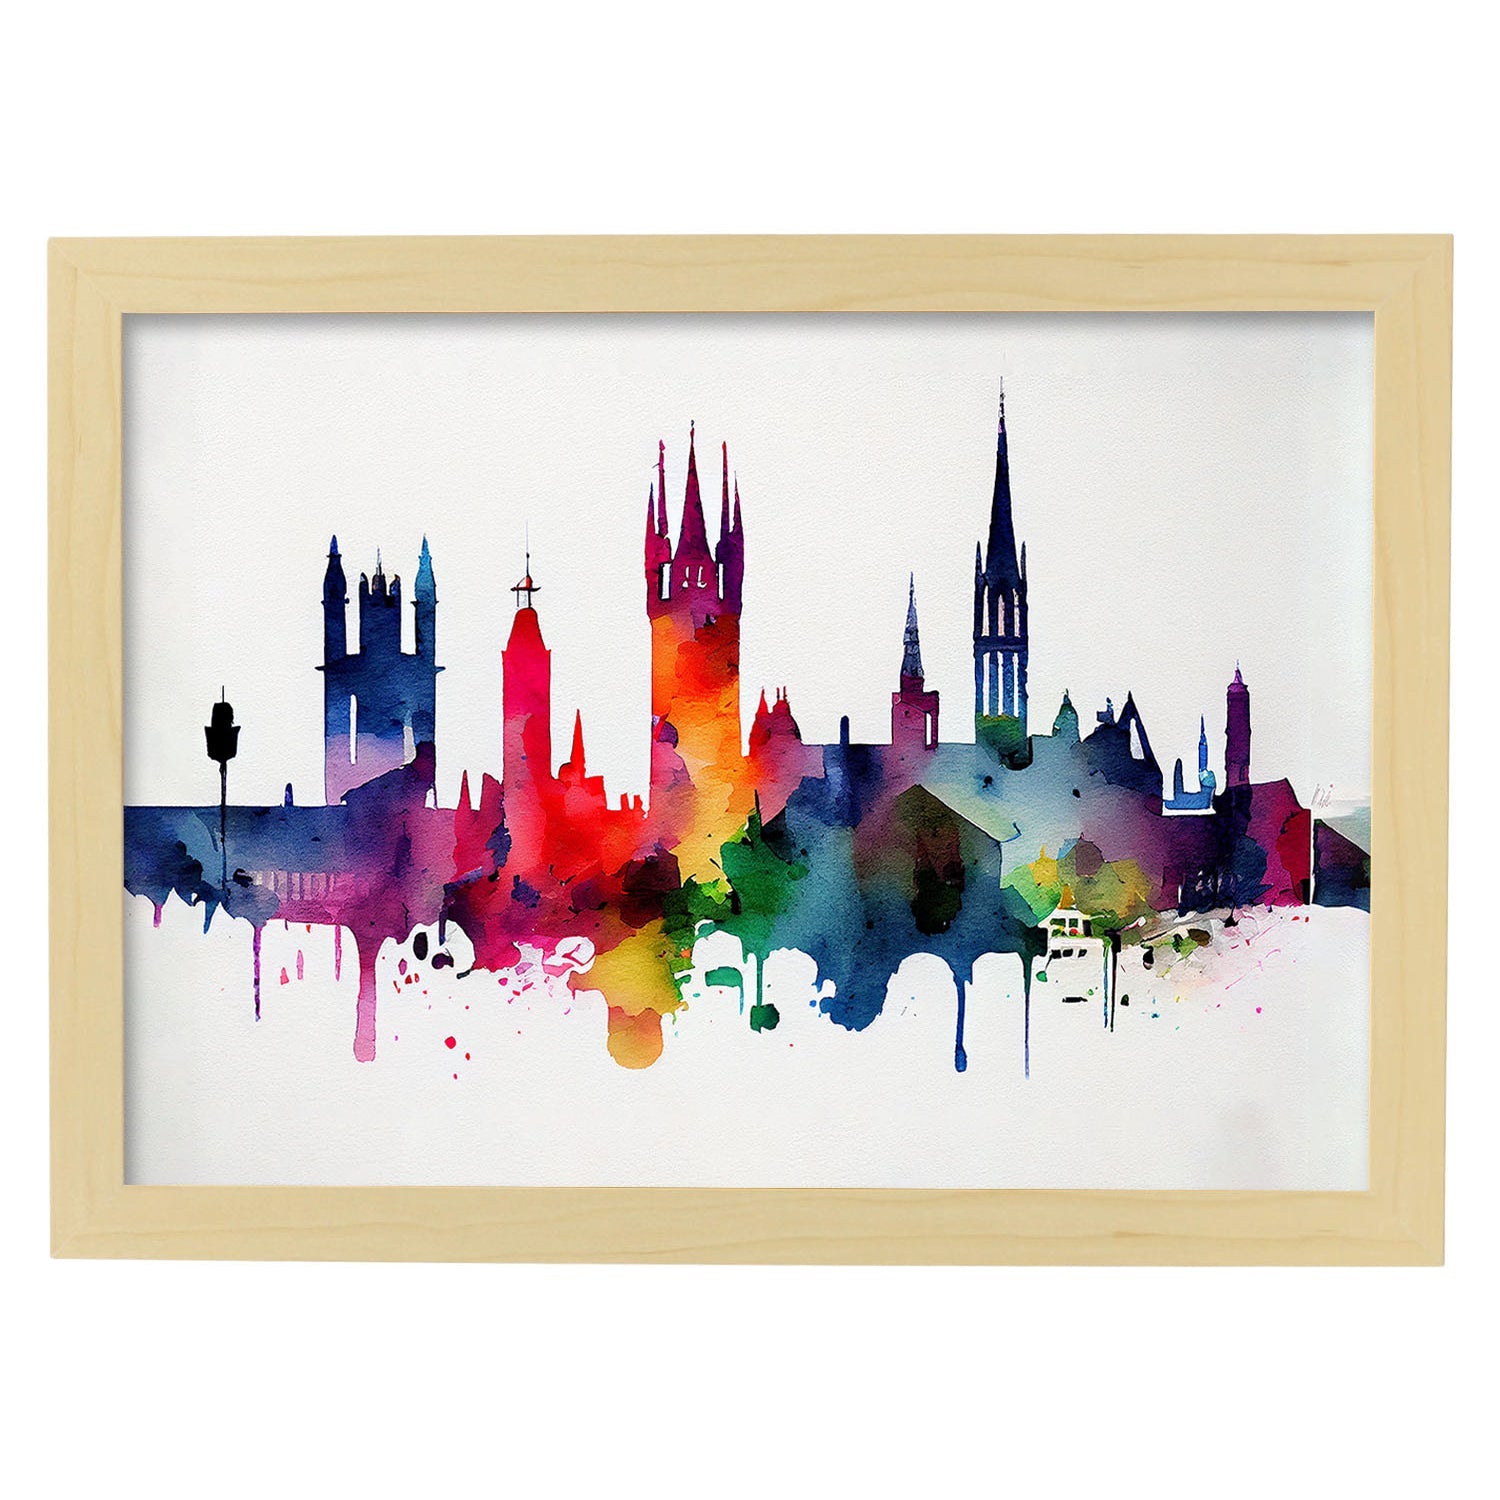 Nacnic watercolor of a skyline of the city of Bruges. Aesthetic Wall Art Prints for Bedroom or Living Room Design.-Artwork-Nacnic-A4-Marco Madera Clara-Nacnic Estudio SL